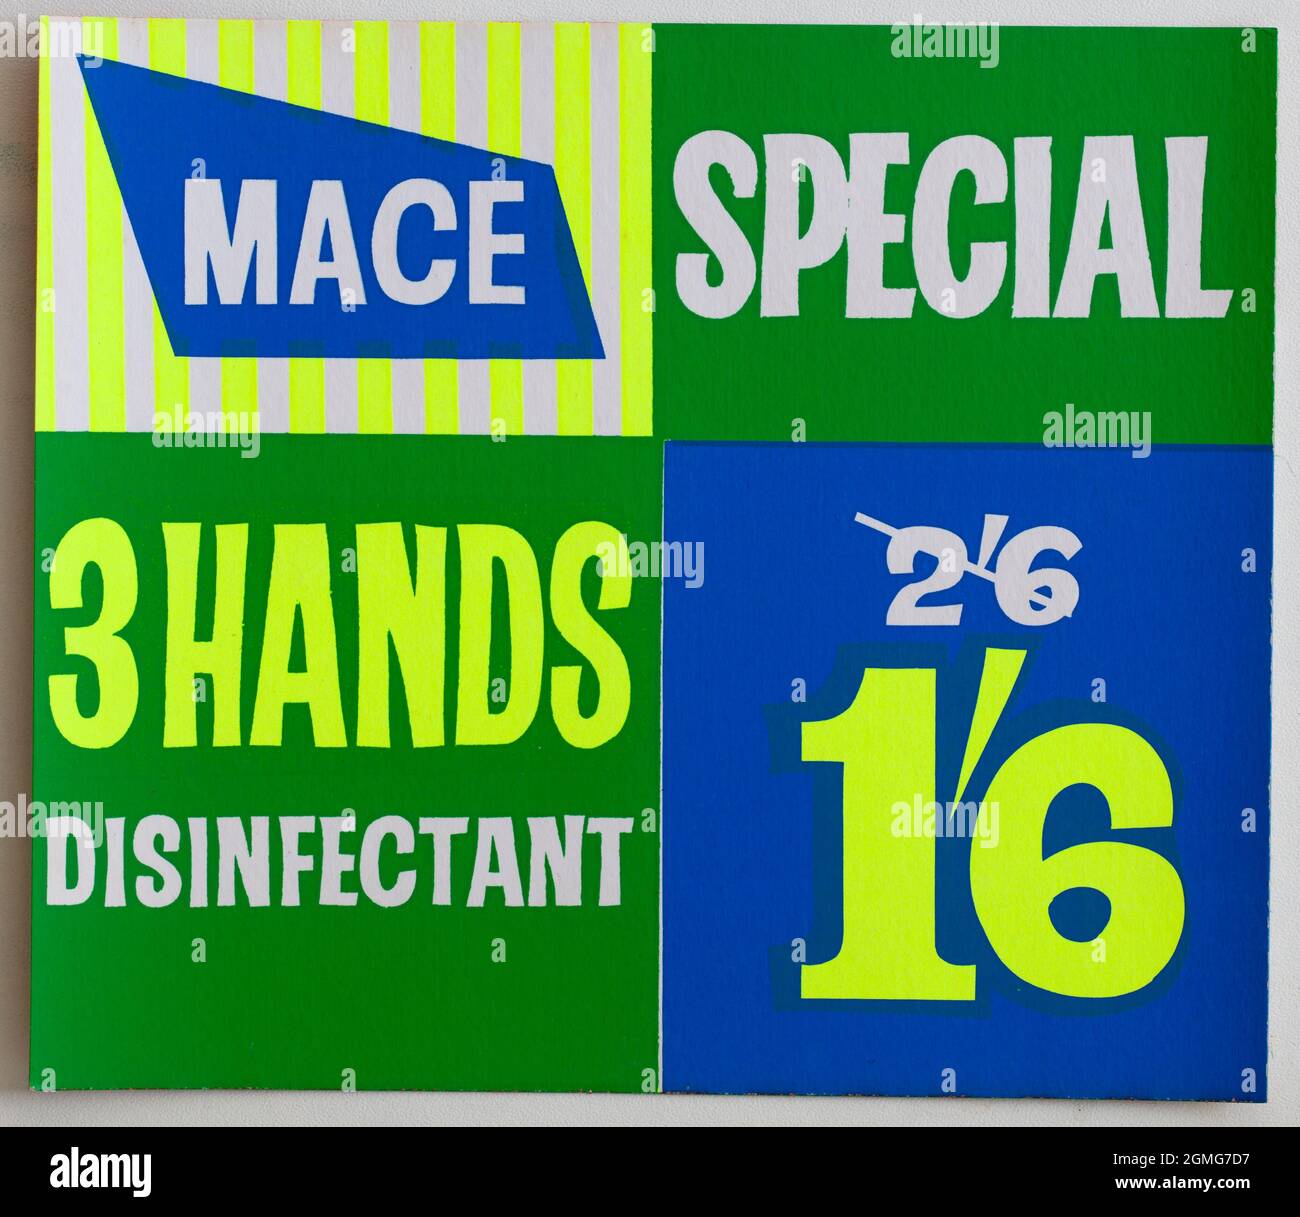 Vintage 1960s Mace Shop Price Display Card - 3 Hands Disinfectant Stock Photo